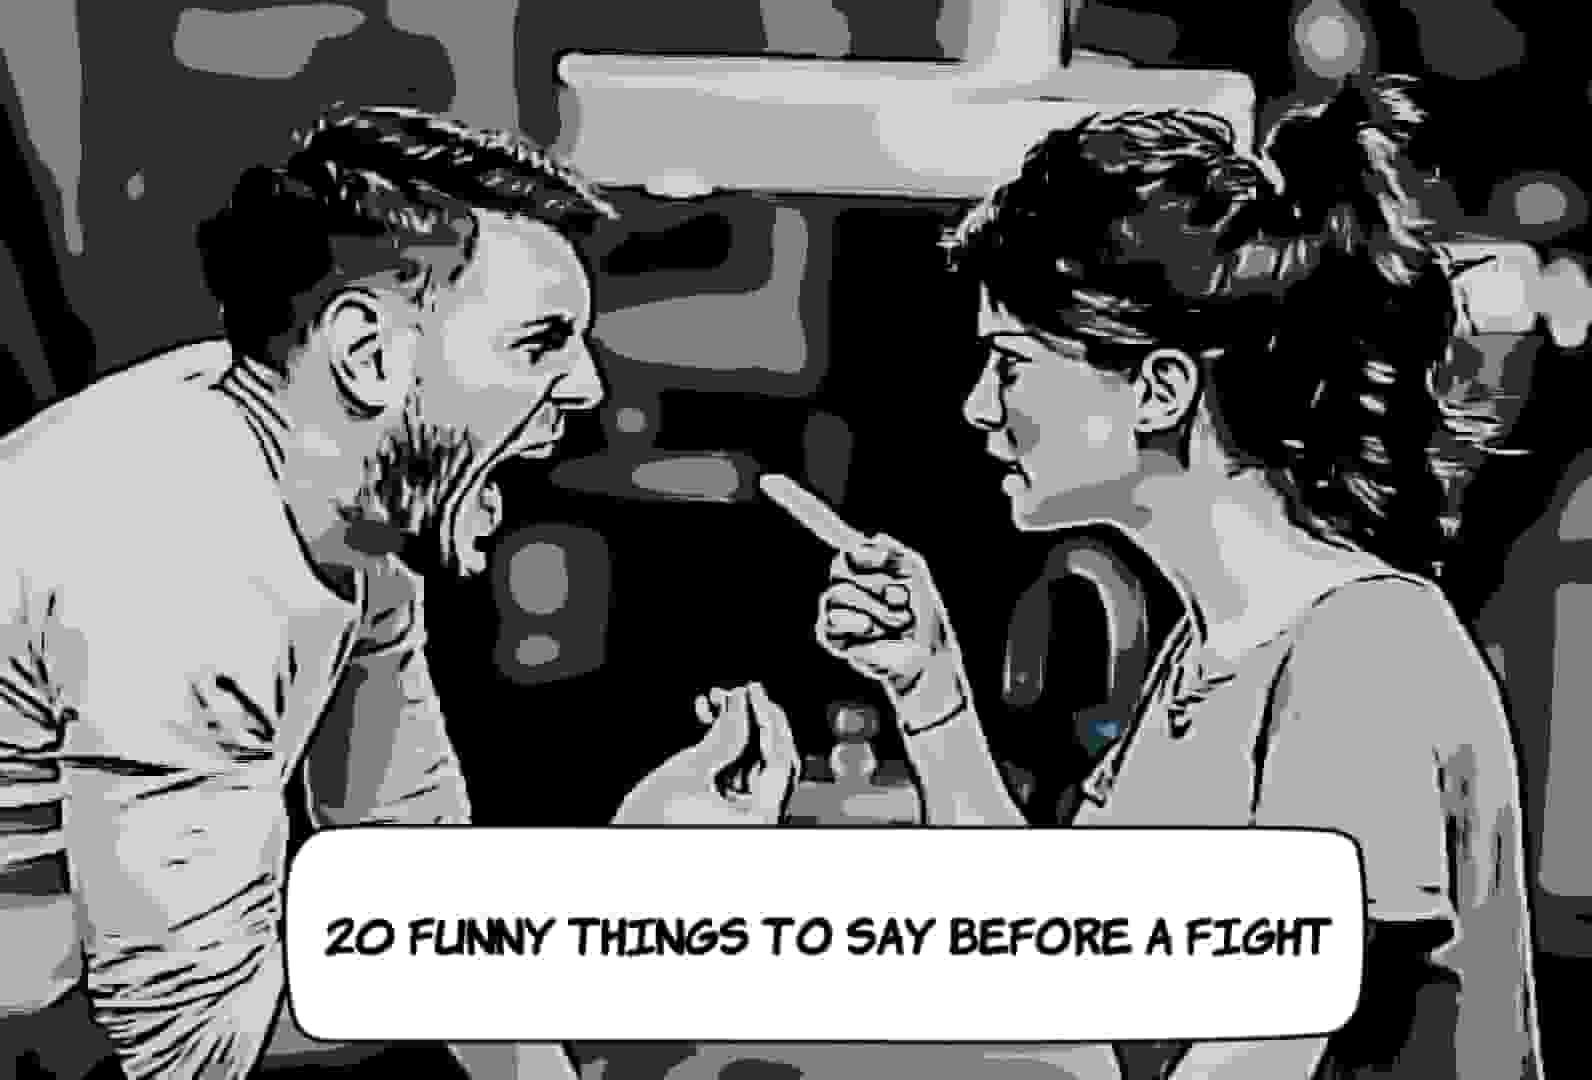 Funny Things to Say Before a Fight